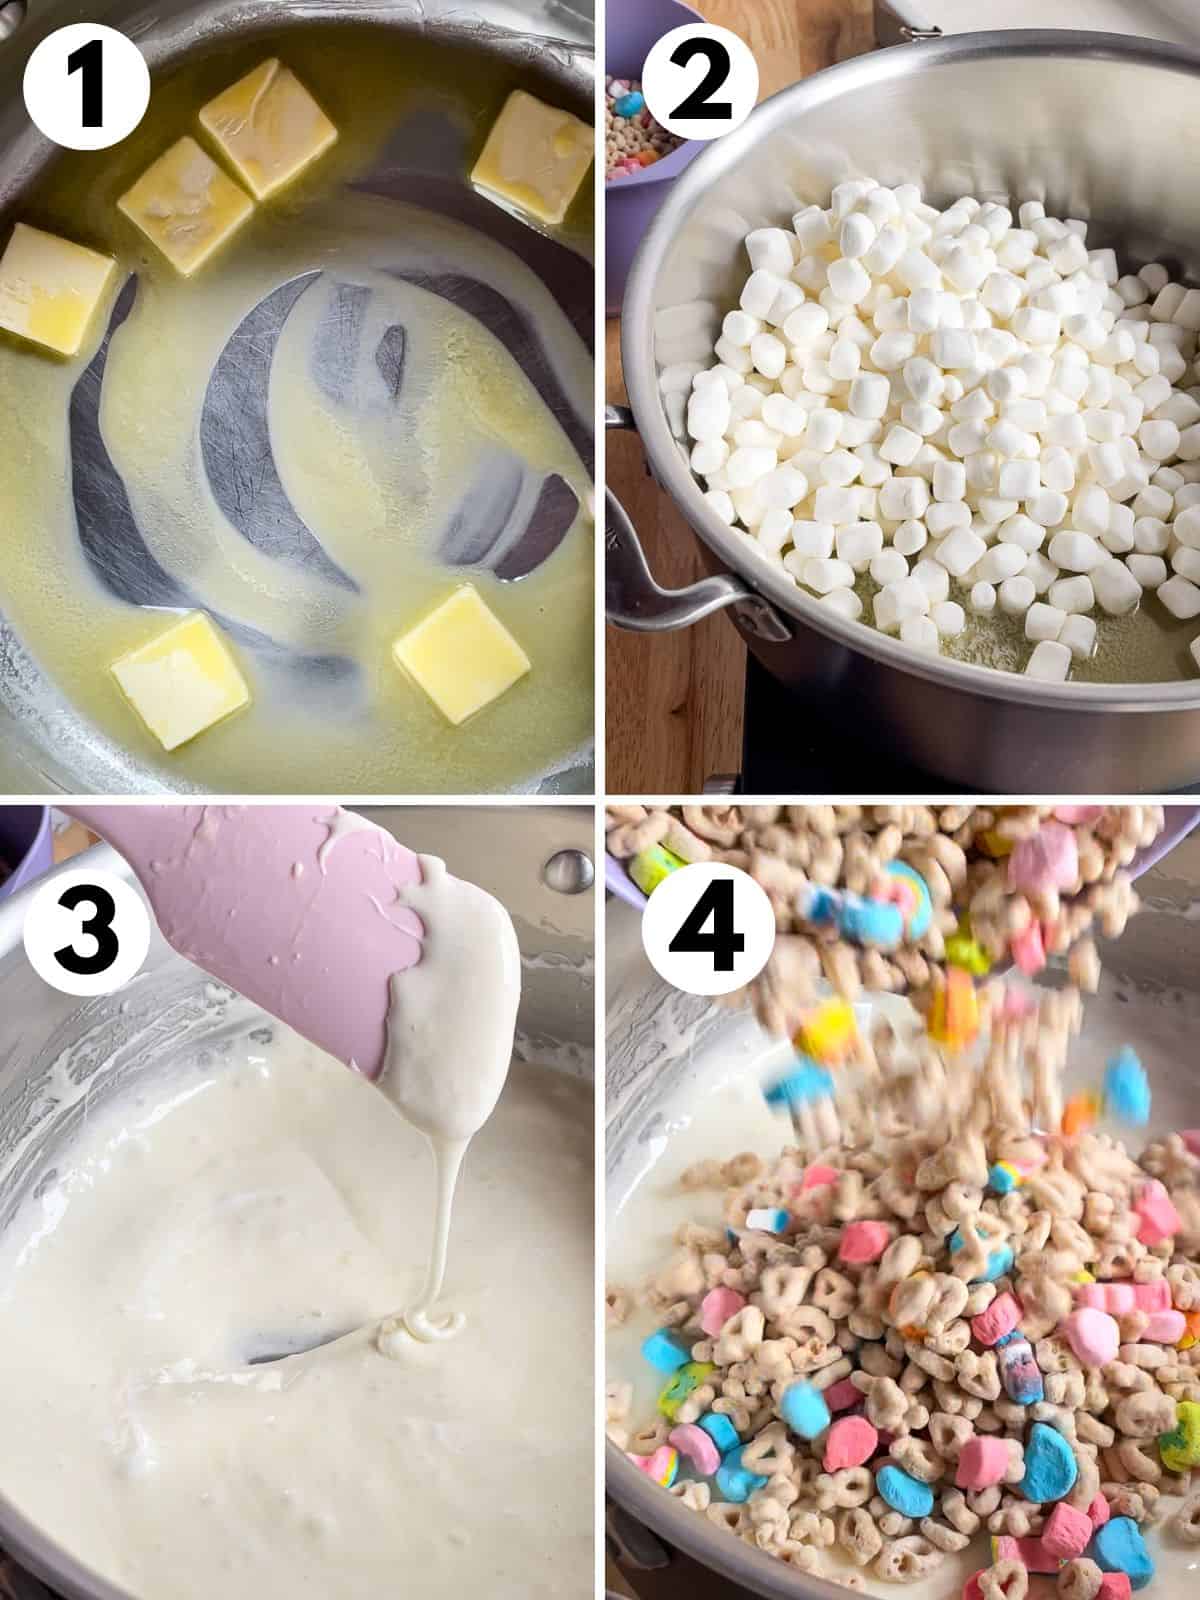 The first four steps for making lucky treats bars. 1. Melting the butter in a large pot. 2. Adding the marshmallows. 3. Melted marshmallows being stirred by a pink rubber spatula. 4. Adding Lucky Charms to the melted marshmallows.